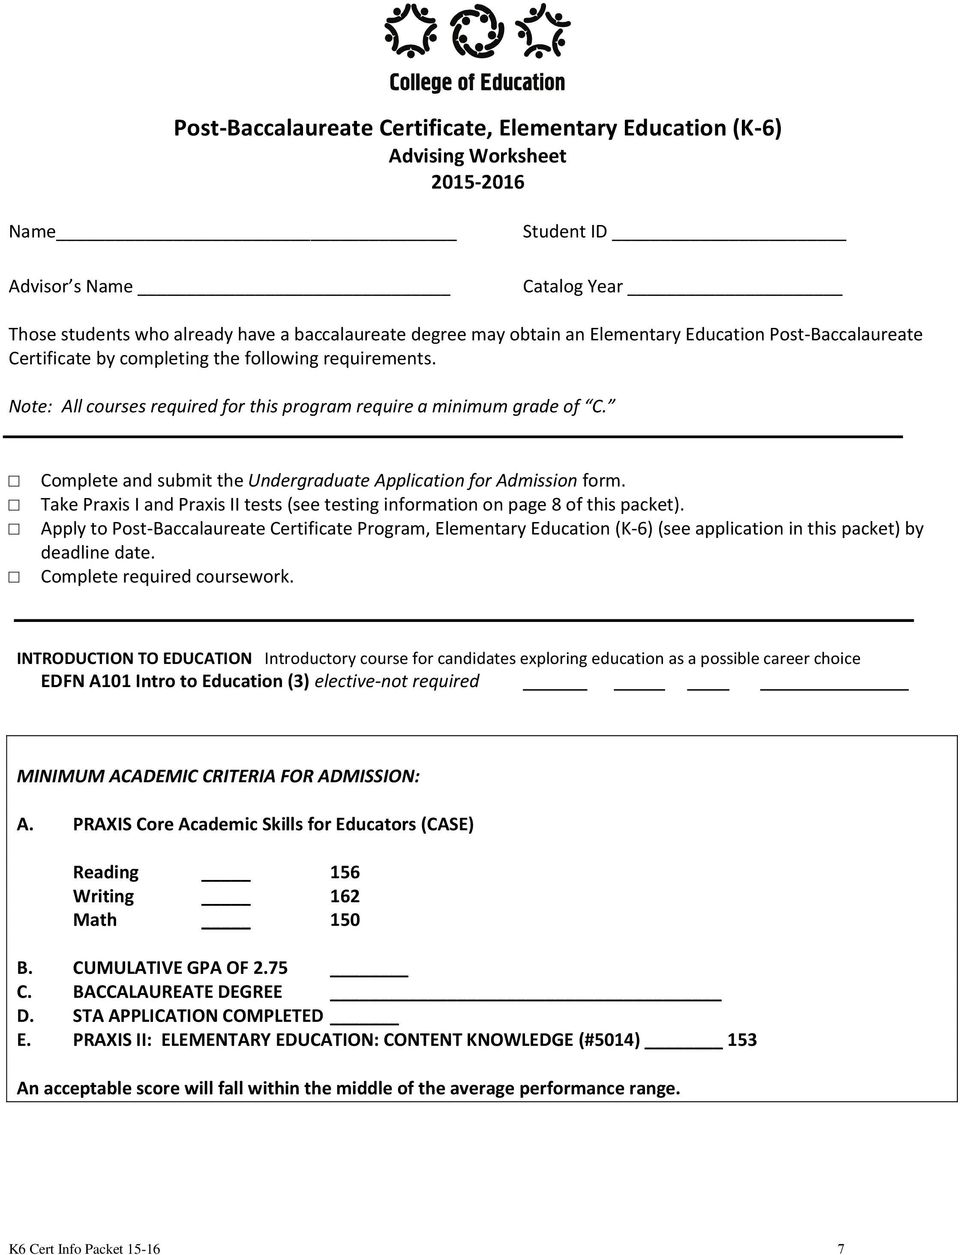 Complete and submit the Undergraduate Application for Admission form. Take Praxis I and Praxis II tests (see testing information on page 8 of this packet).